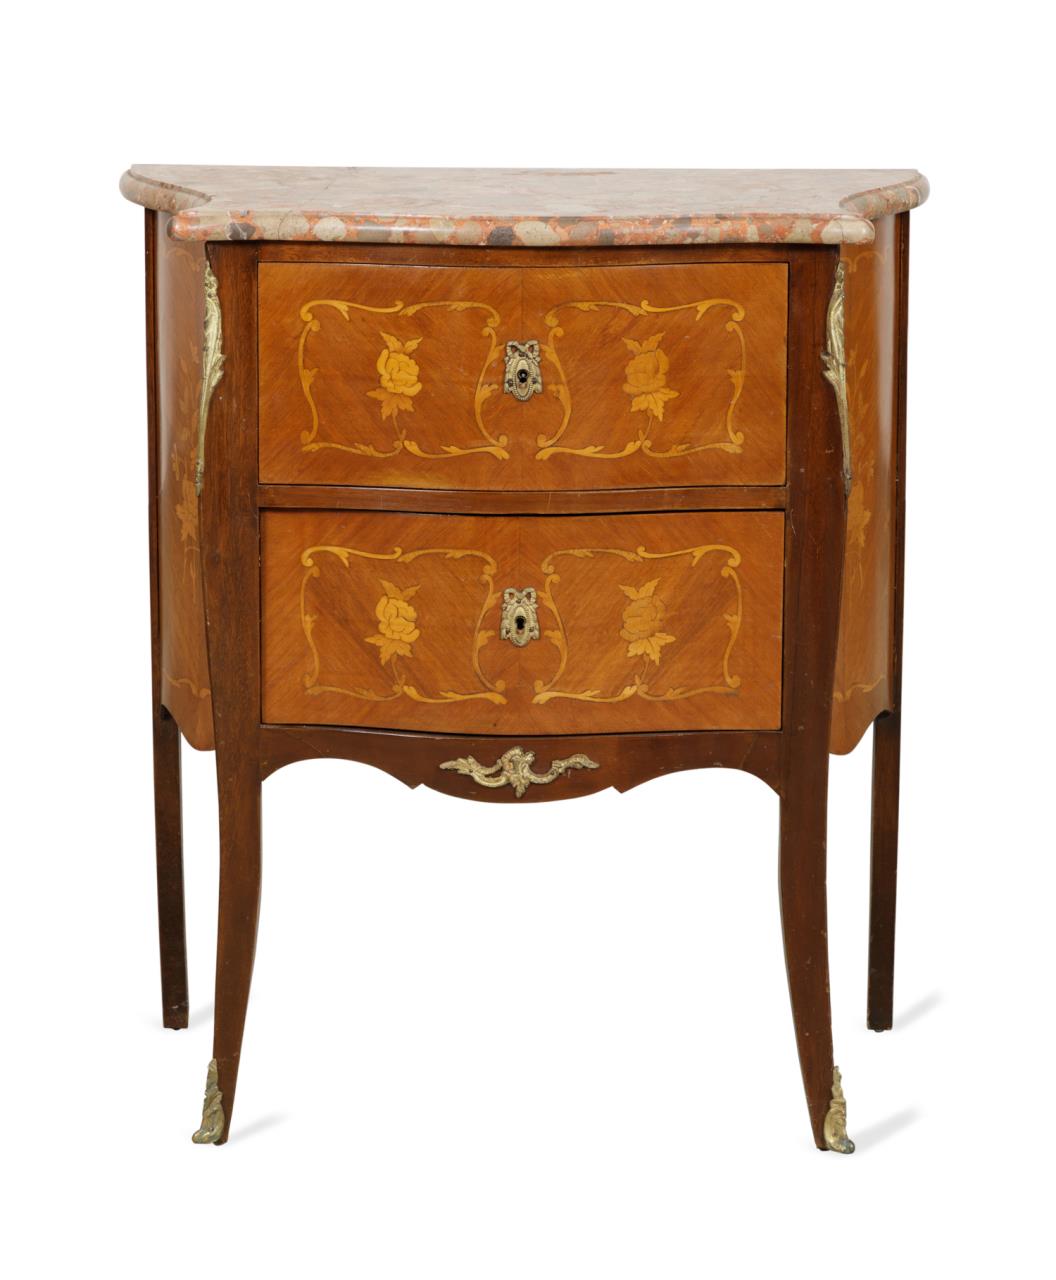 LOUIS XV STYLE SMALL MARBLE TOP